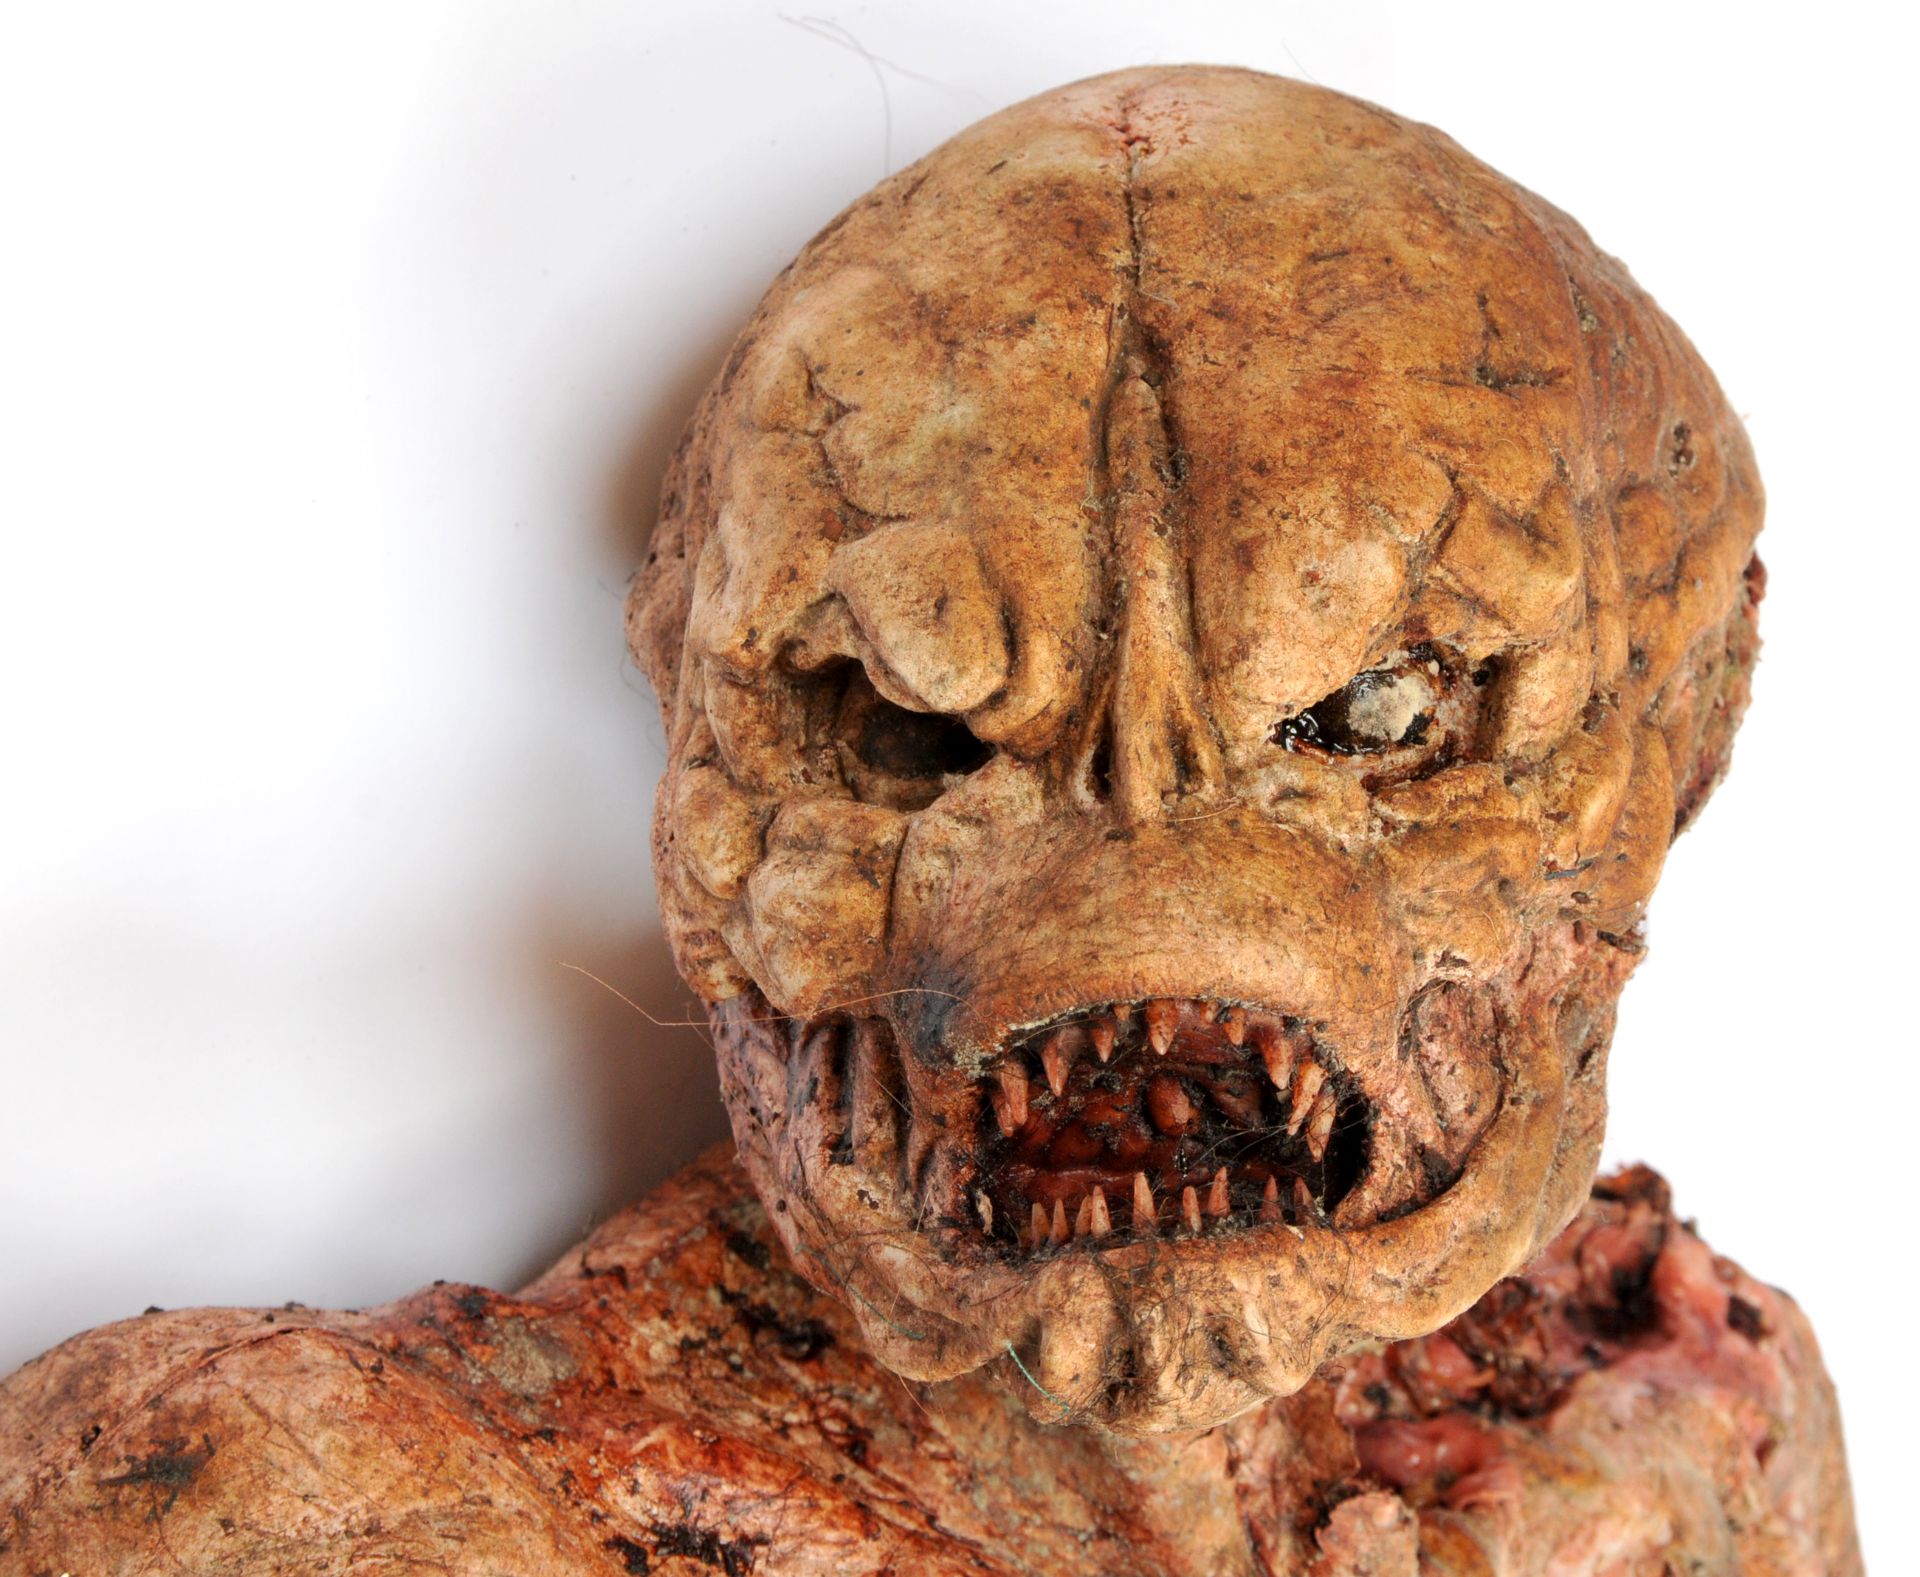 Disembowelled Baby Monster Prop used in the production of the Horror Movie F.E.A.S.T - Image 2 of 5